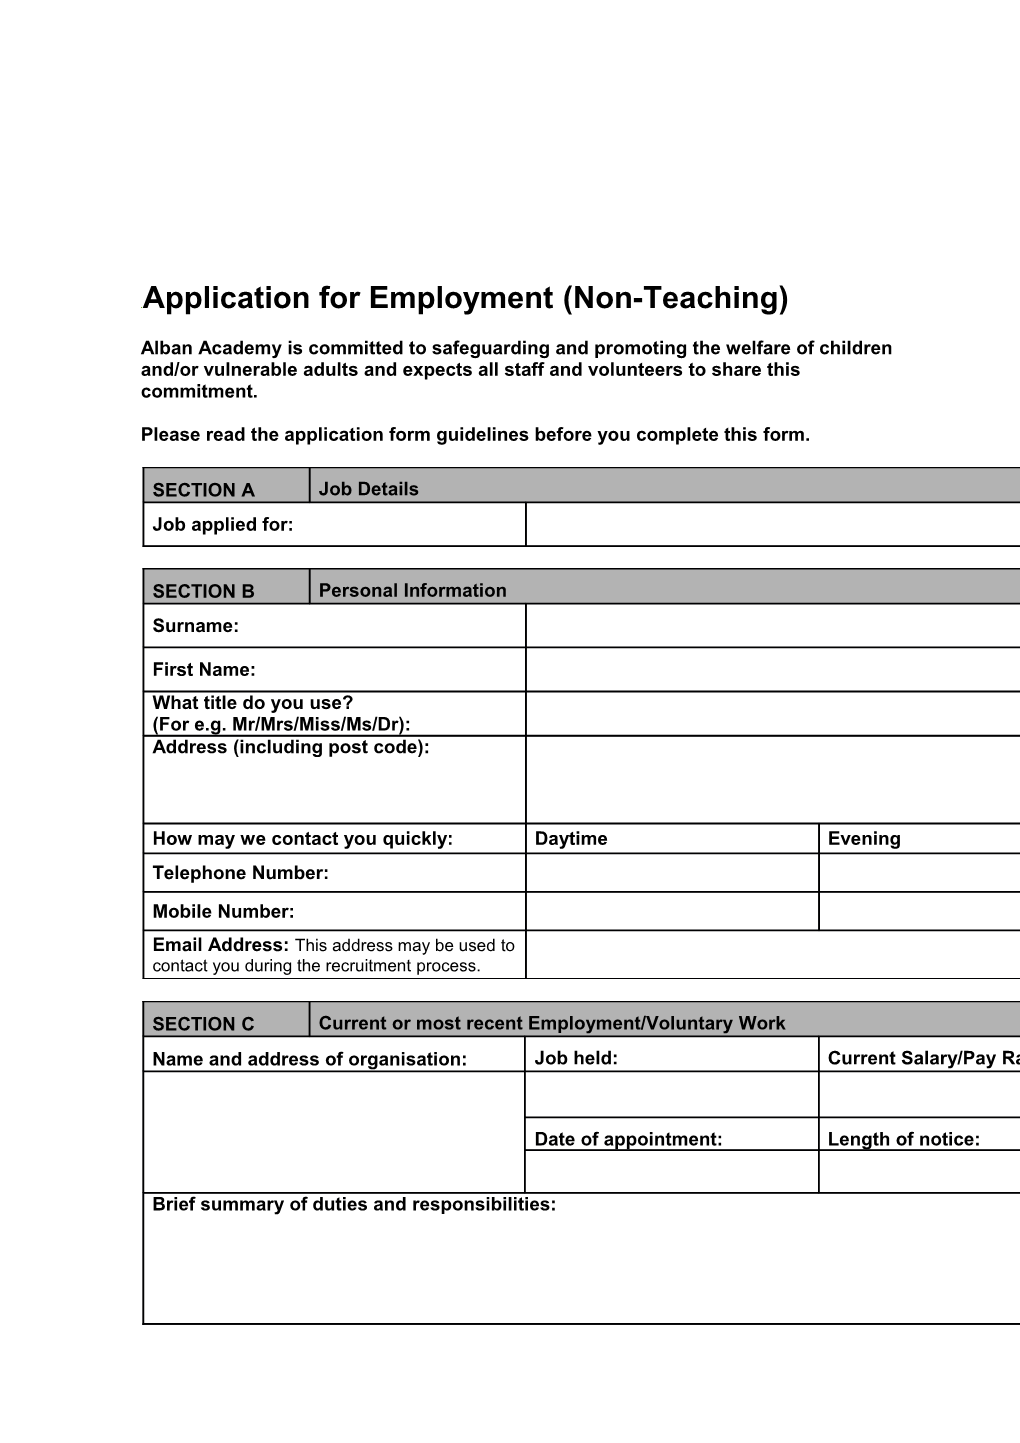 Application for Employment (Non-Teaching)